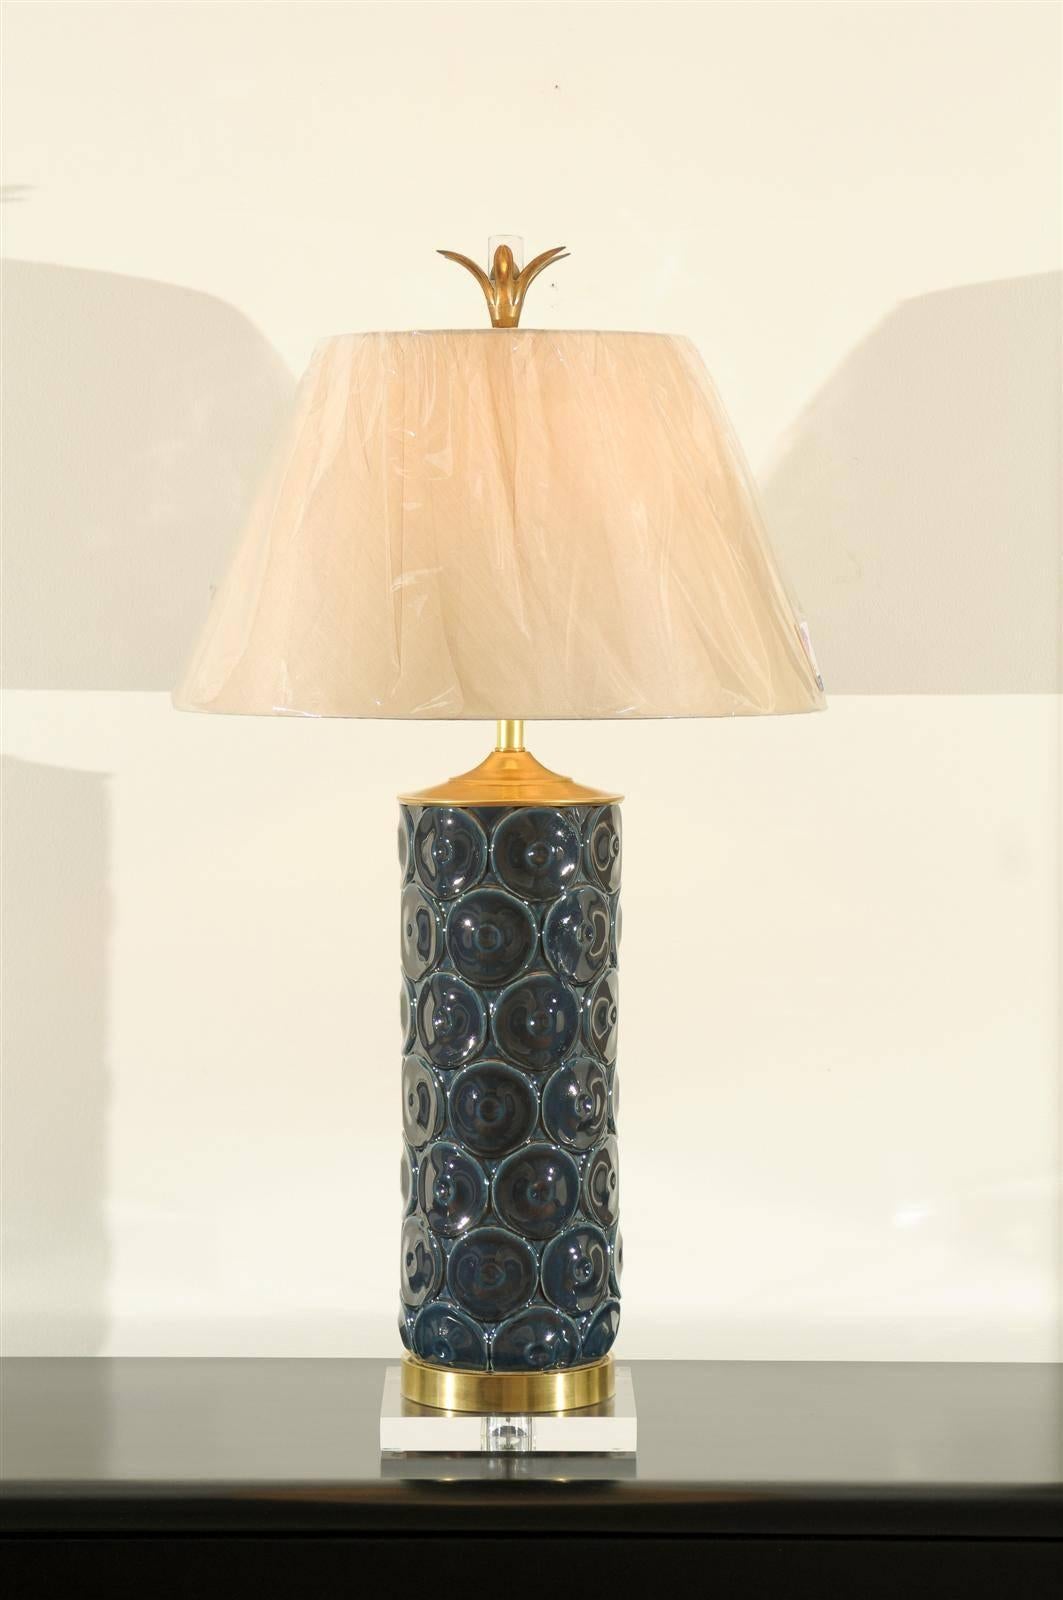 These magnificent lamps are shipped as photographed and described, complete with new shades, harps and finials. 

A stellar pair of large-scale lamps, circa 1970. Textured glazed ceramic vessels with solid brass accents atop a Lucite base. Beautiful